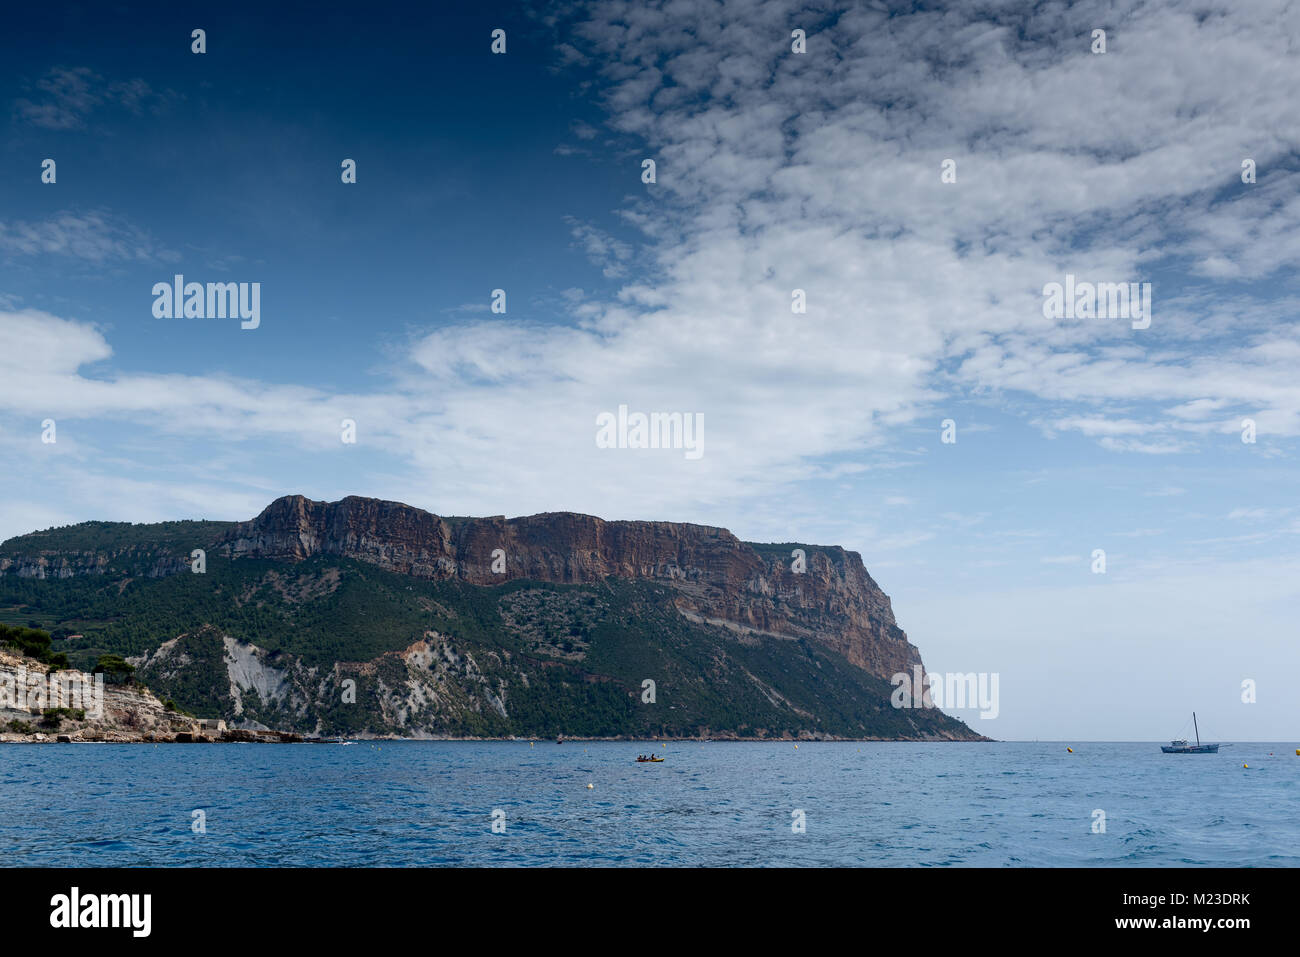 View on Cape Canaille from the sea, France, Cassis, summer Stock Photo